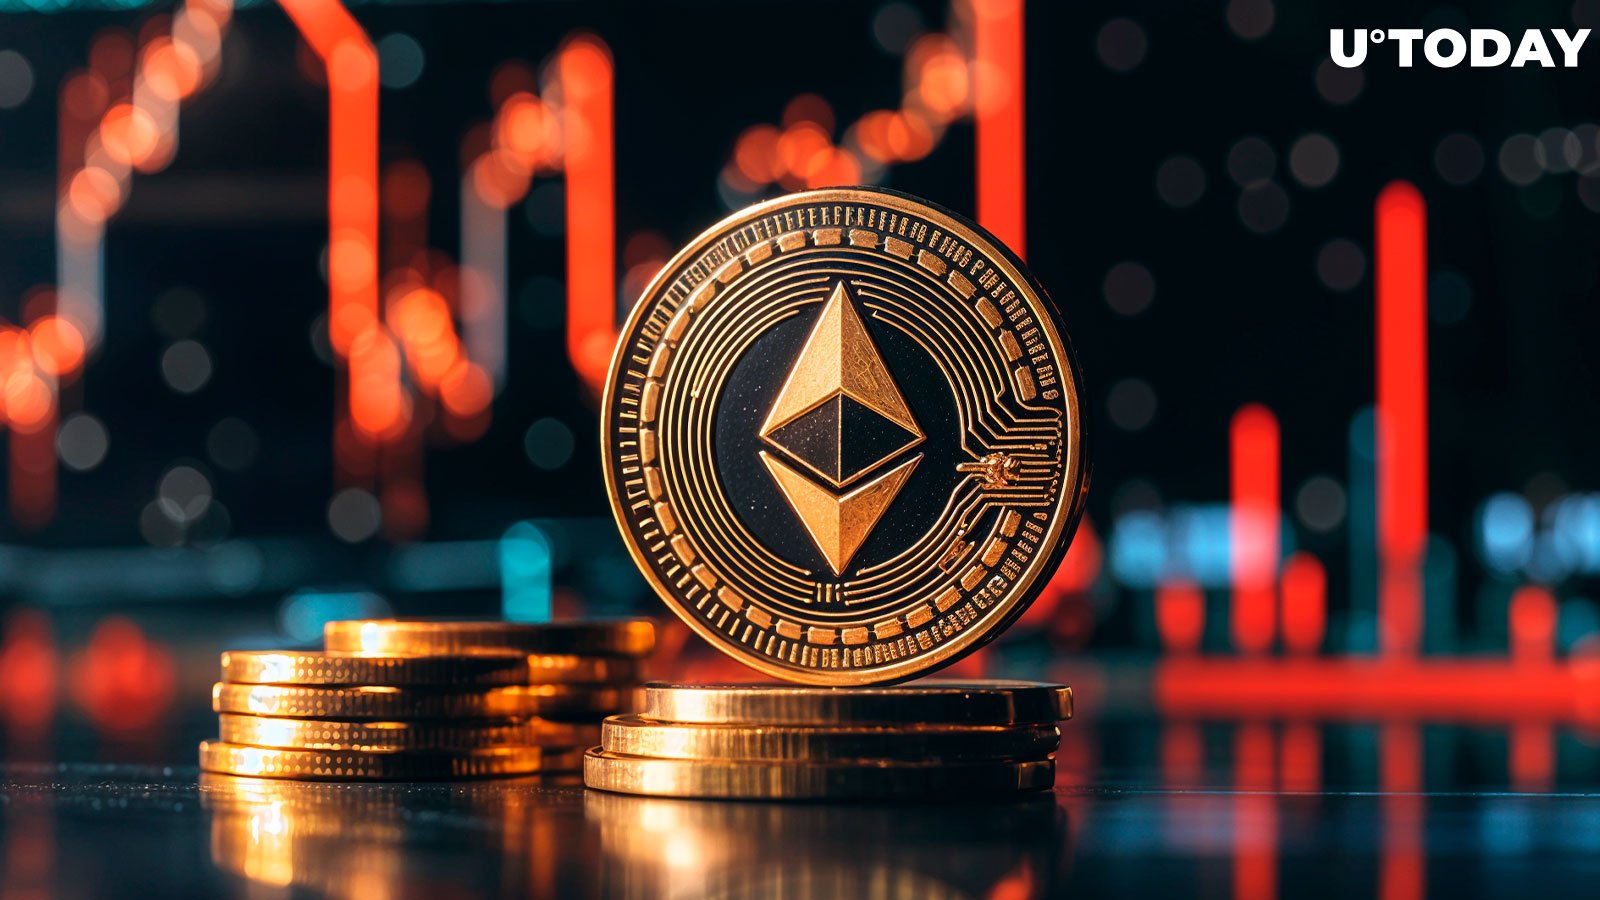 Ethereum (ETH) to Break $4,100 as Falling Wedge Pattern Plays Out